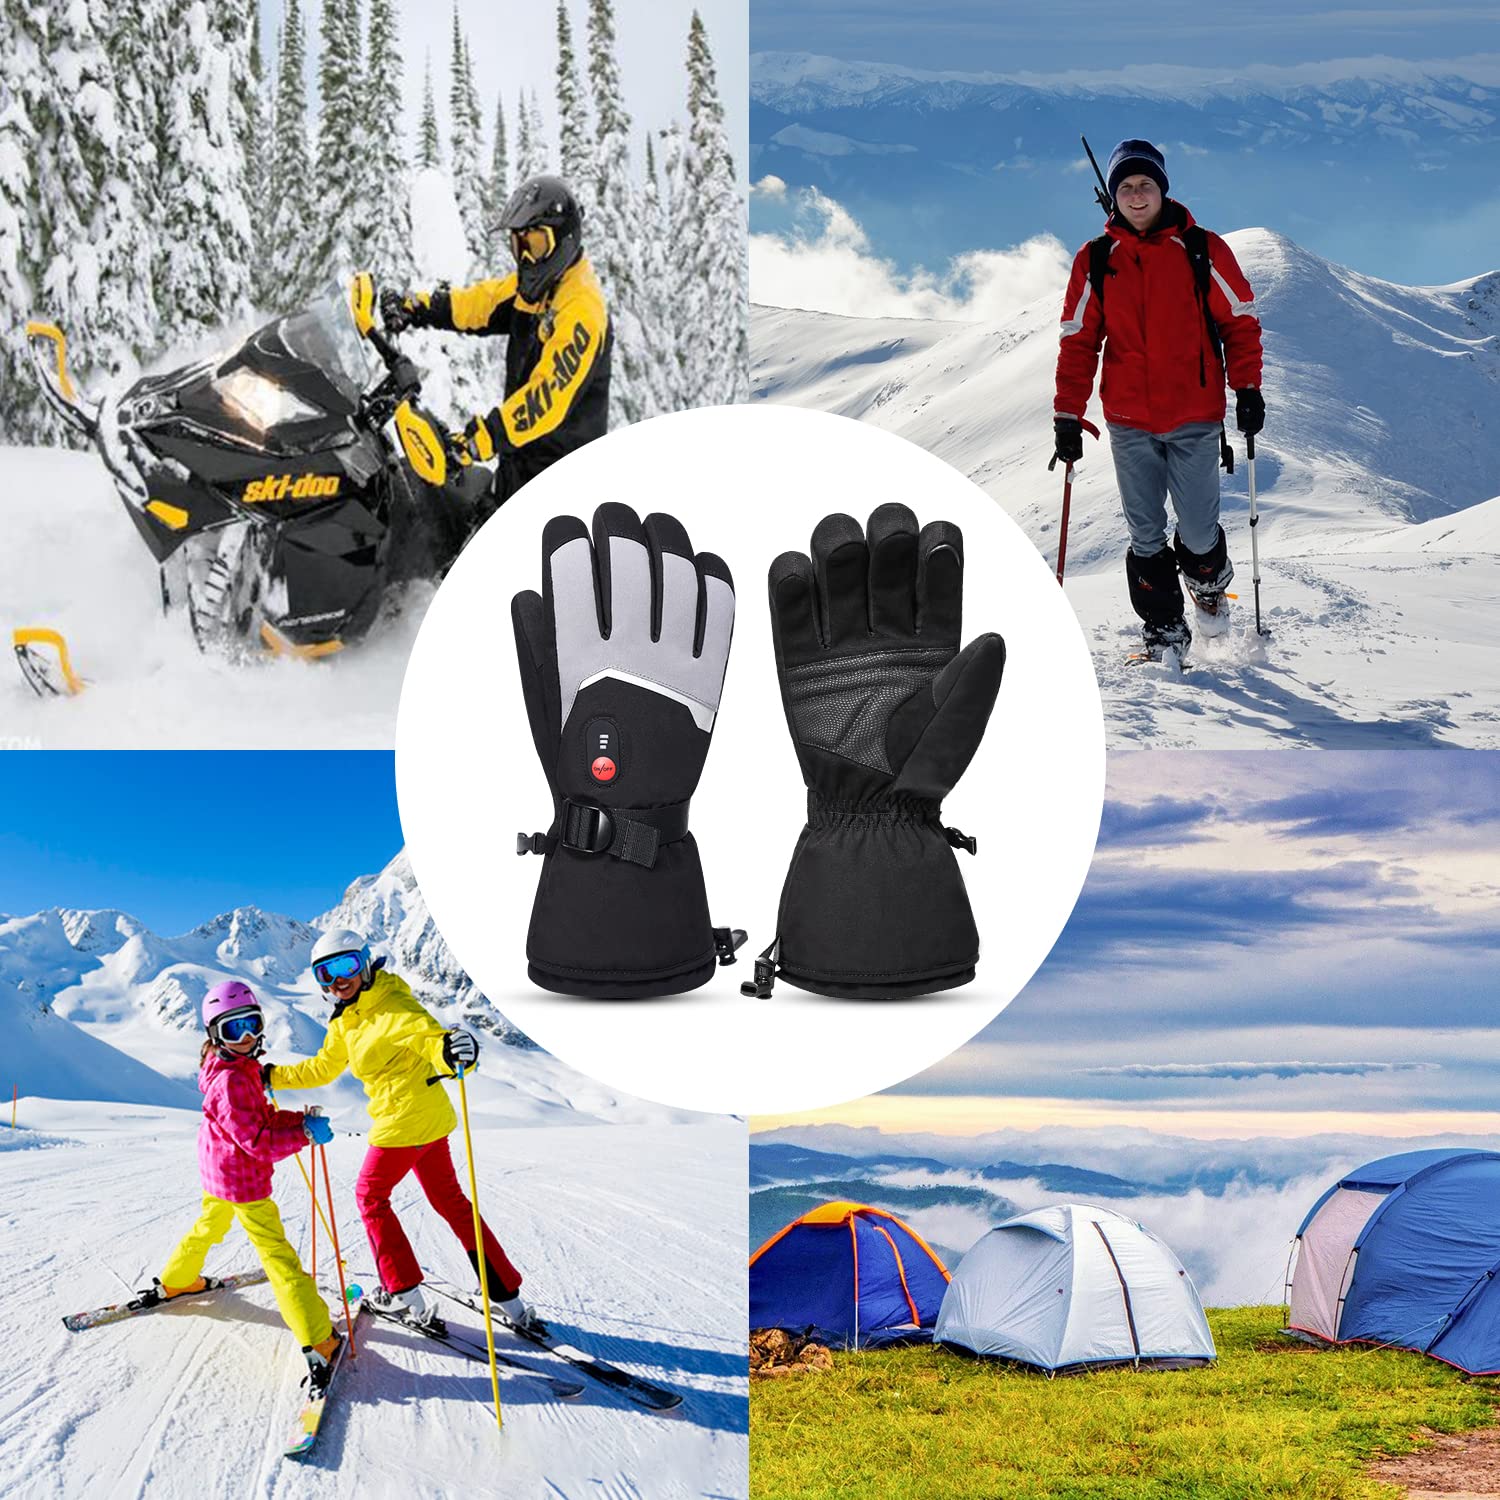 Snow Deer Heated Gloves Mens Womens Heated Ski Gloves Mittens 7.4V 2200mAh Electric Rechargeable Battery Gloves for Winter Skiing Skating Snow Camping Hiking